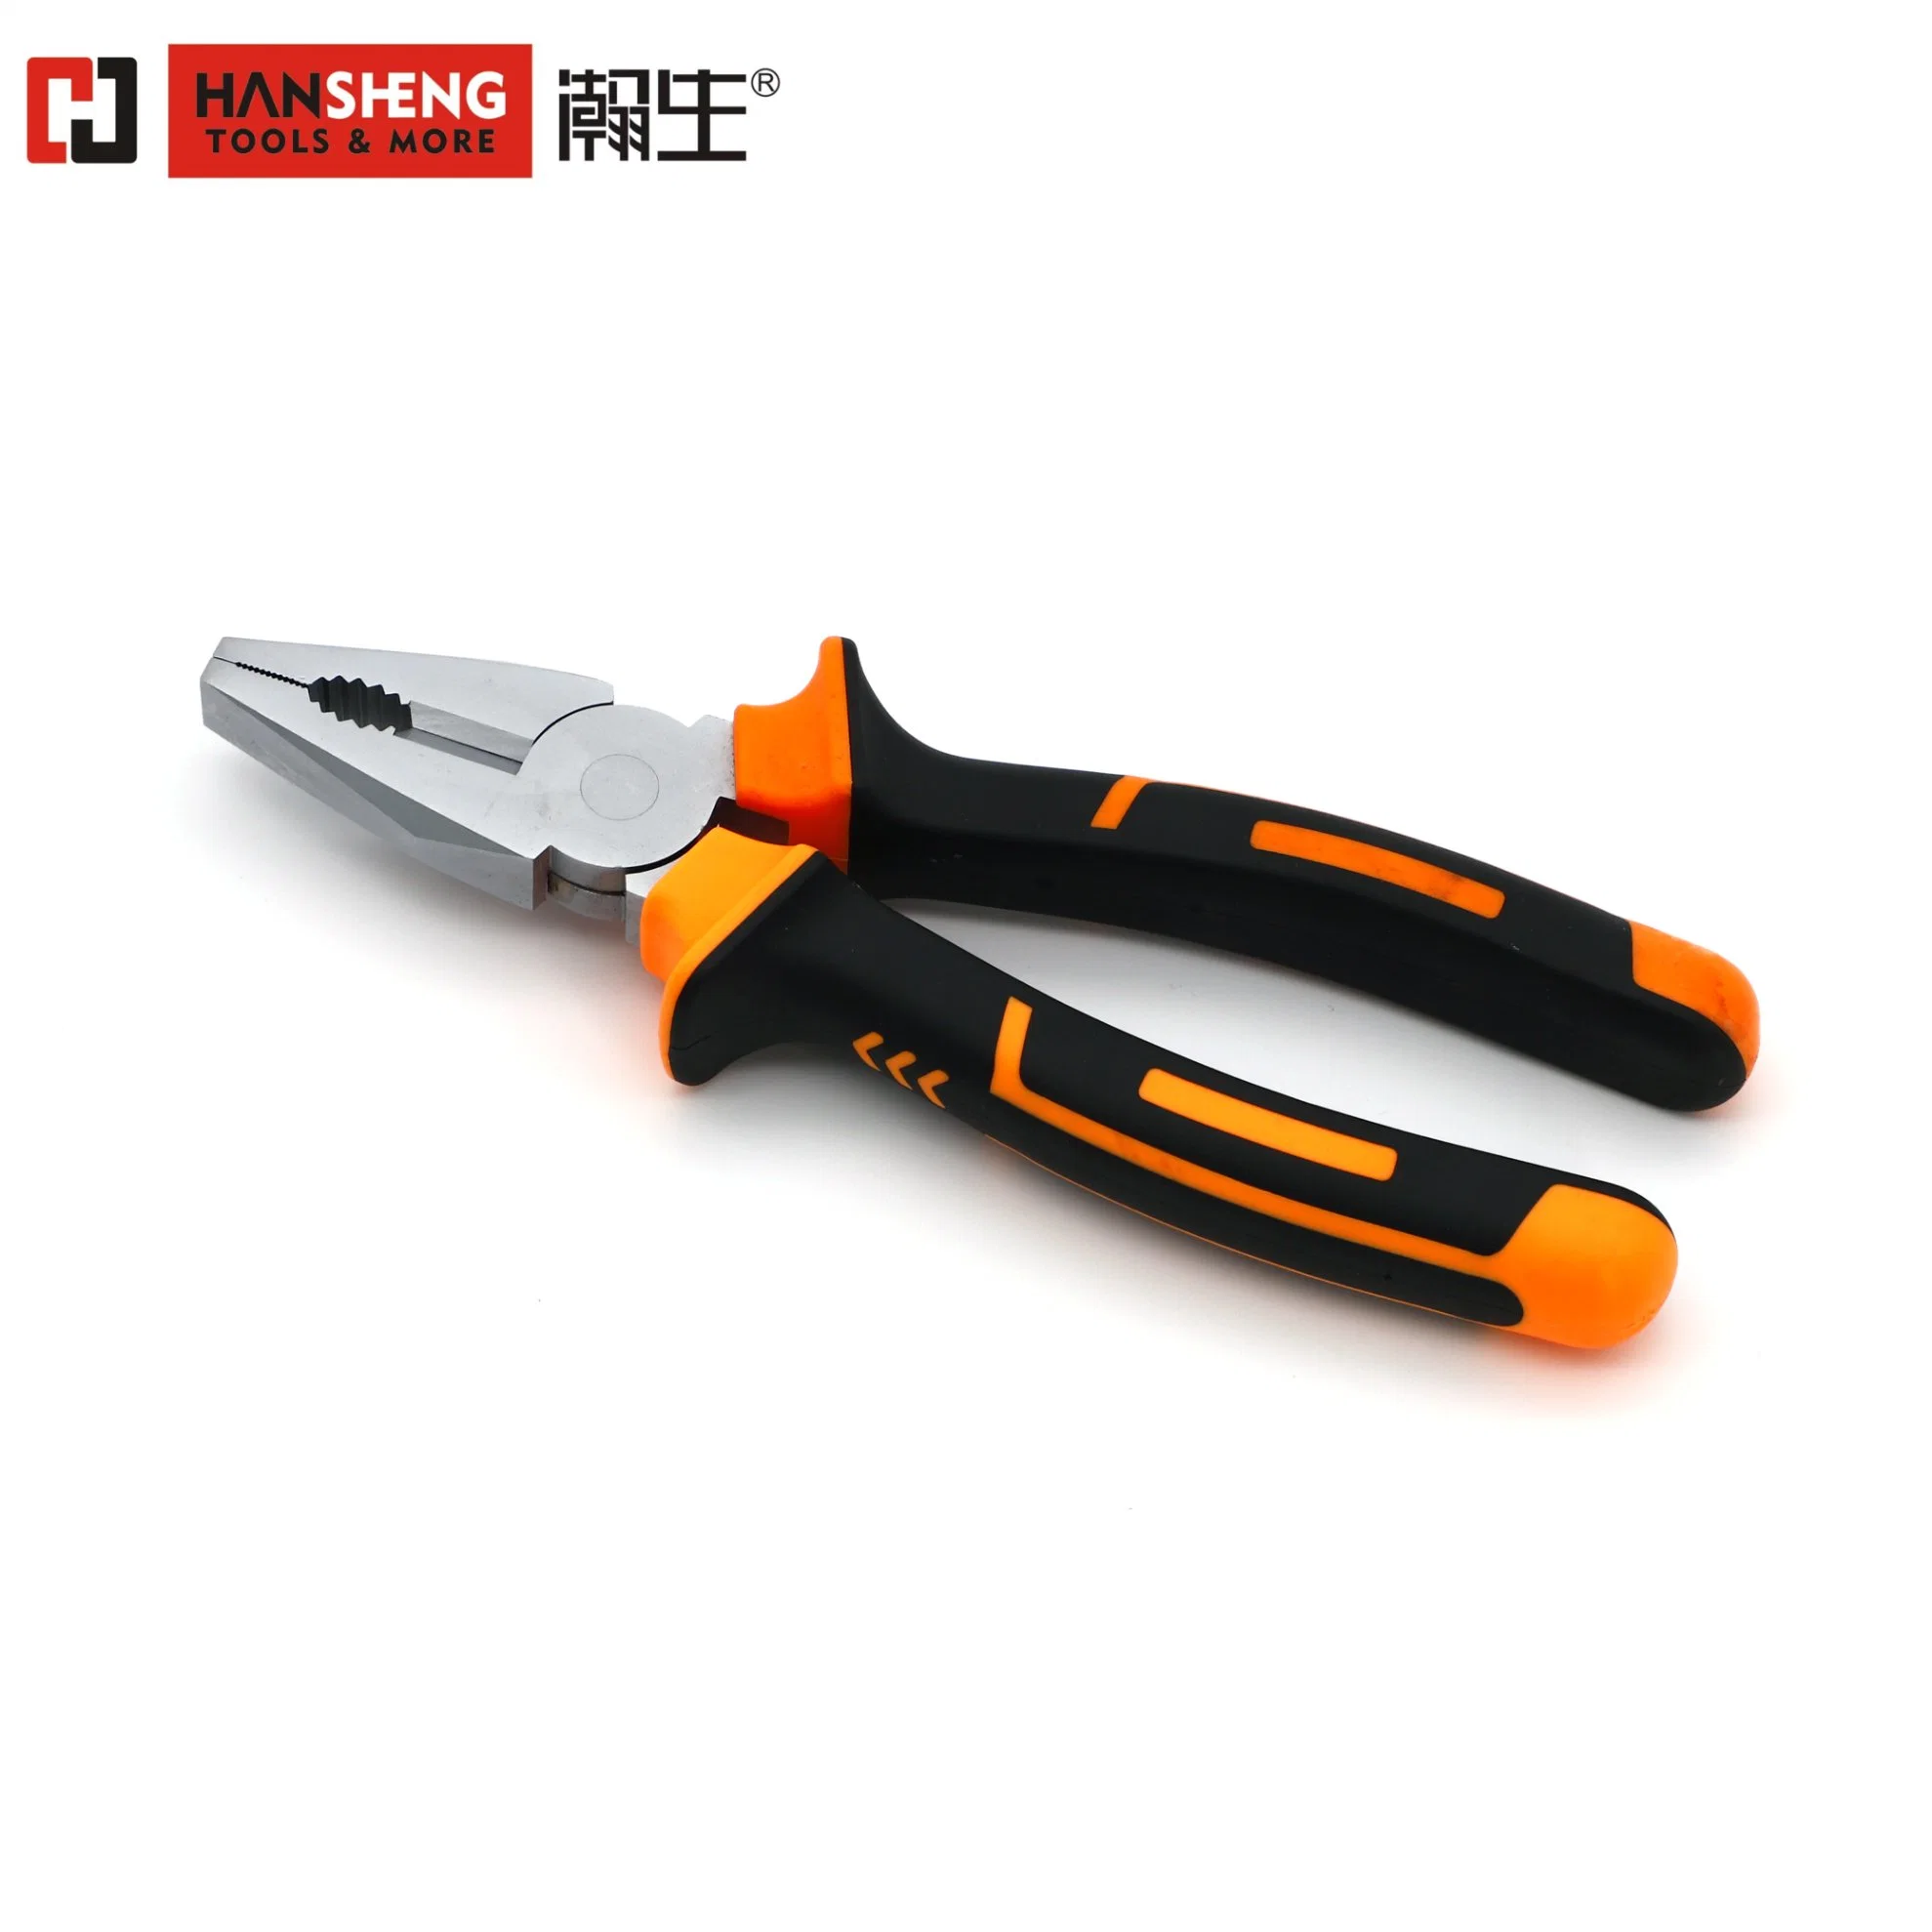 Professional Combination Pliers, Hand Tool, Hardware Tool, Made of Cr-V, PVC /TPR Handles, German Type, High Quality, Combination Pliers, 6", 7", 8"